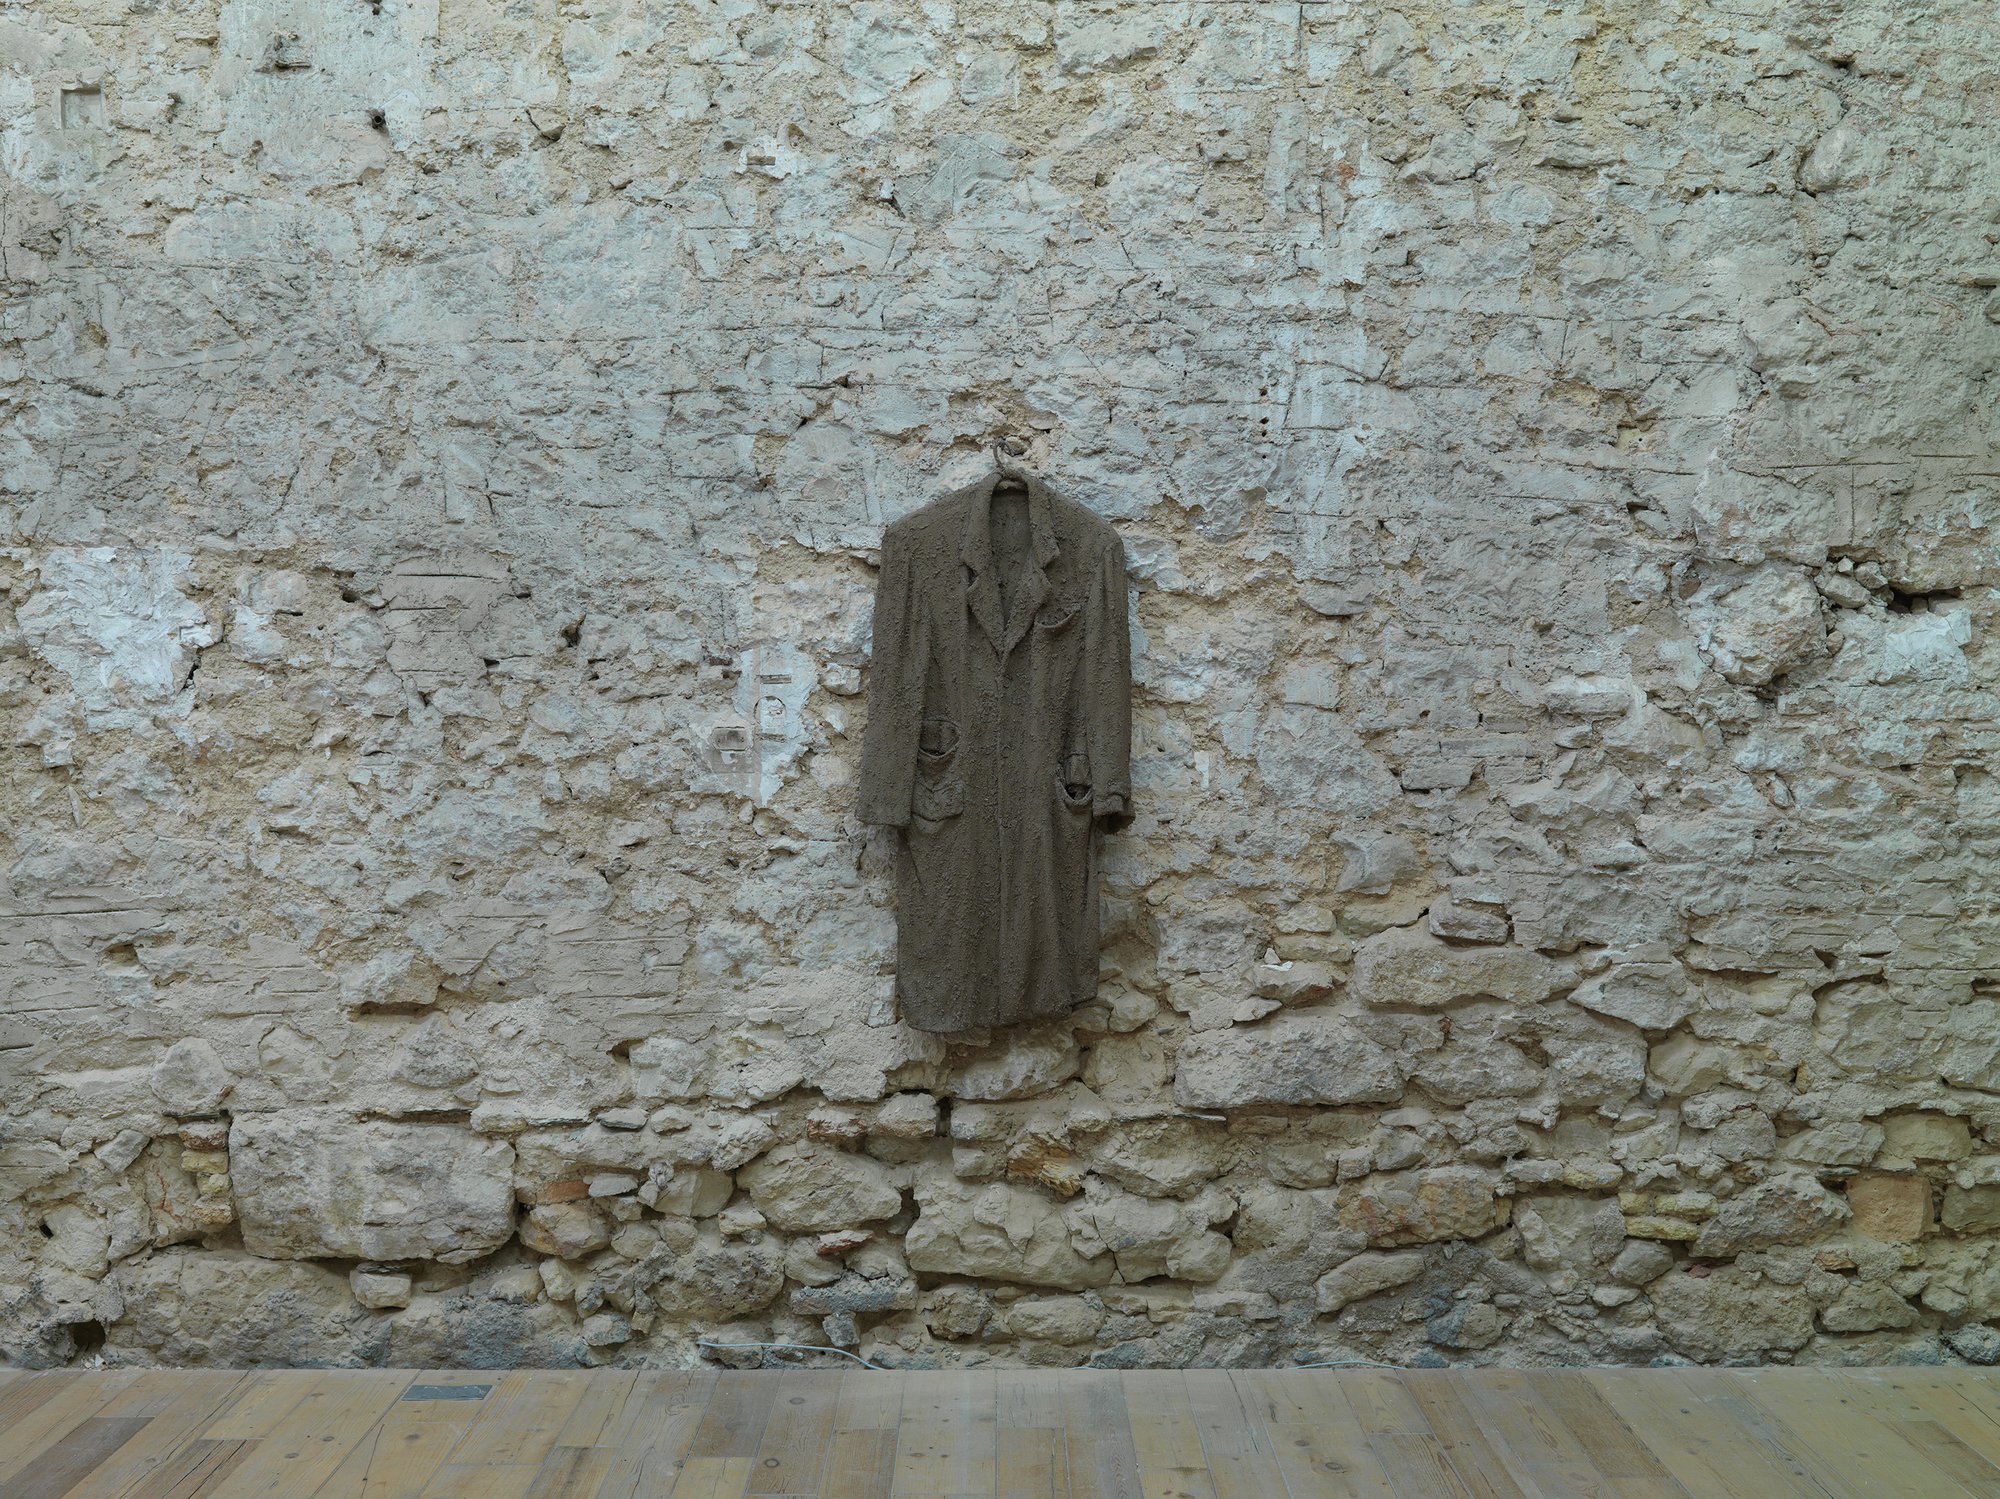 Thanasis Totsikas, Untitled, coat dipped in soil, 60 x 130 cm (23 5/8 x 51 1/8 in), 1980 – 2022. Installation view, Miracles, Rodeo, Piraeus, 2022